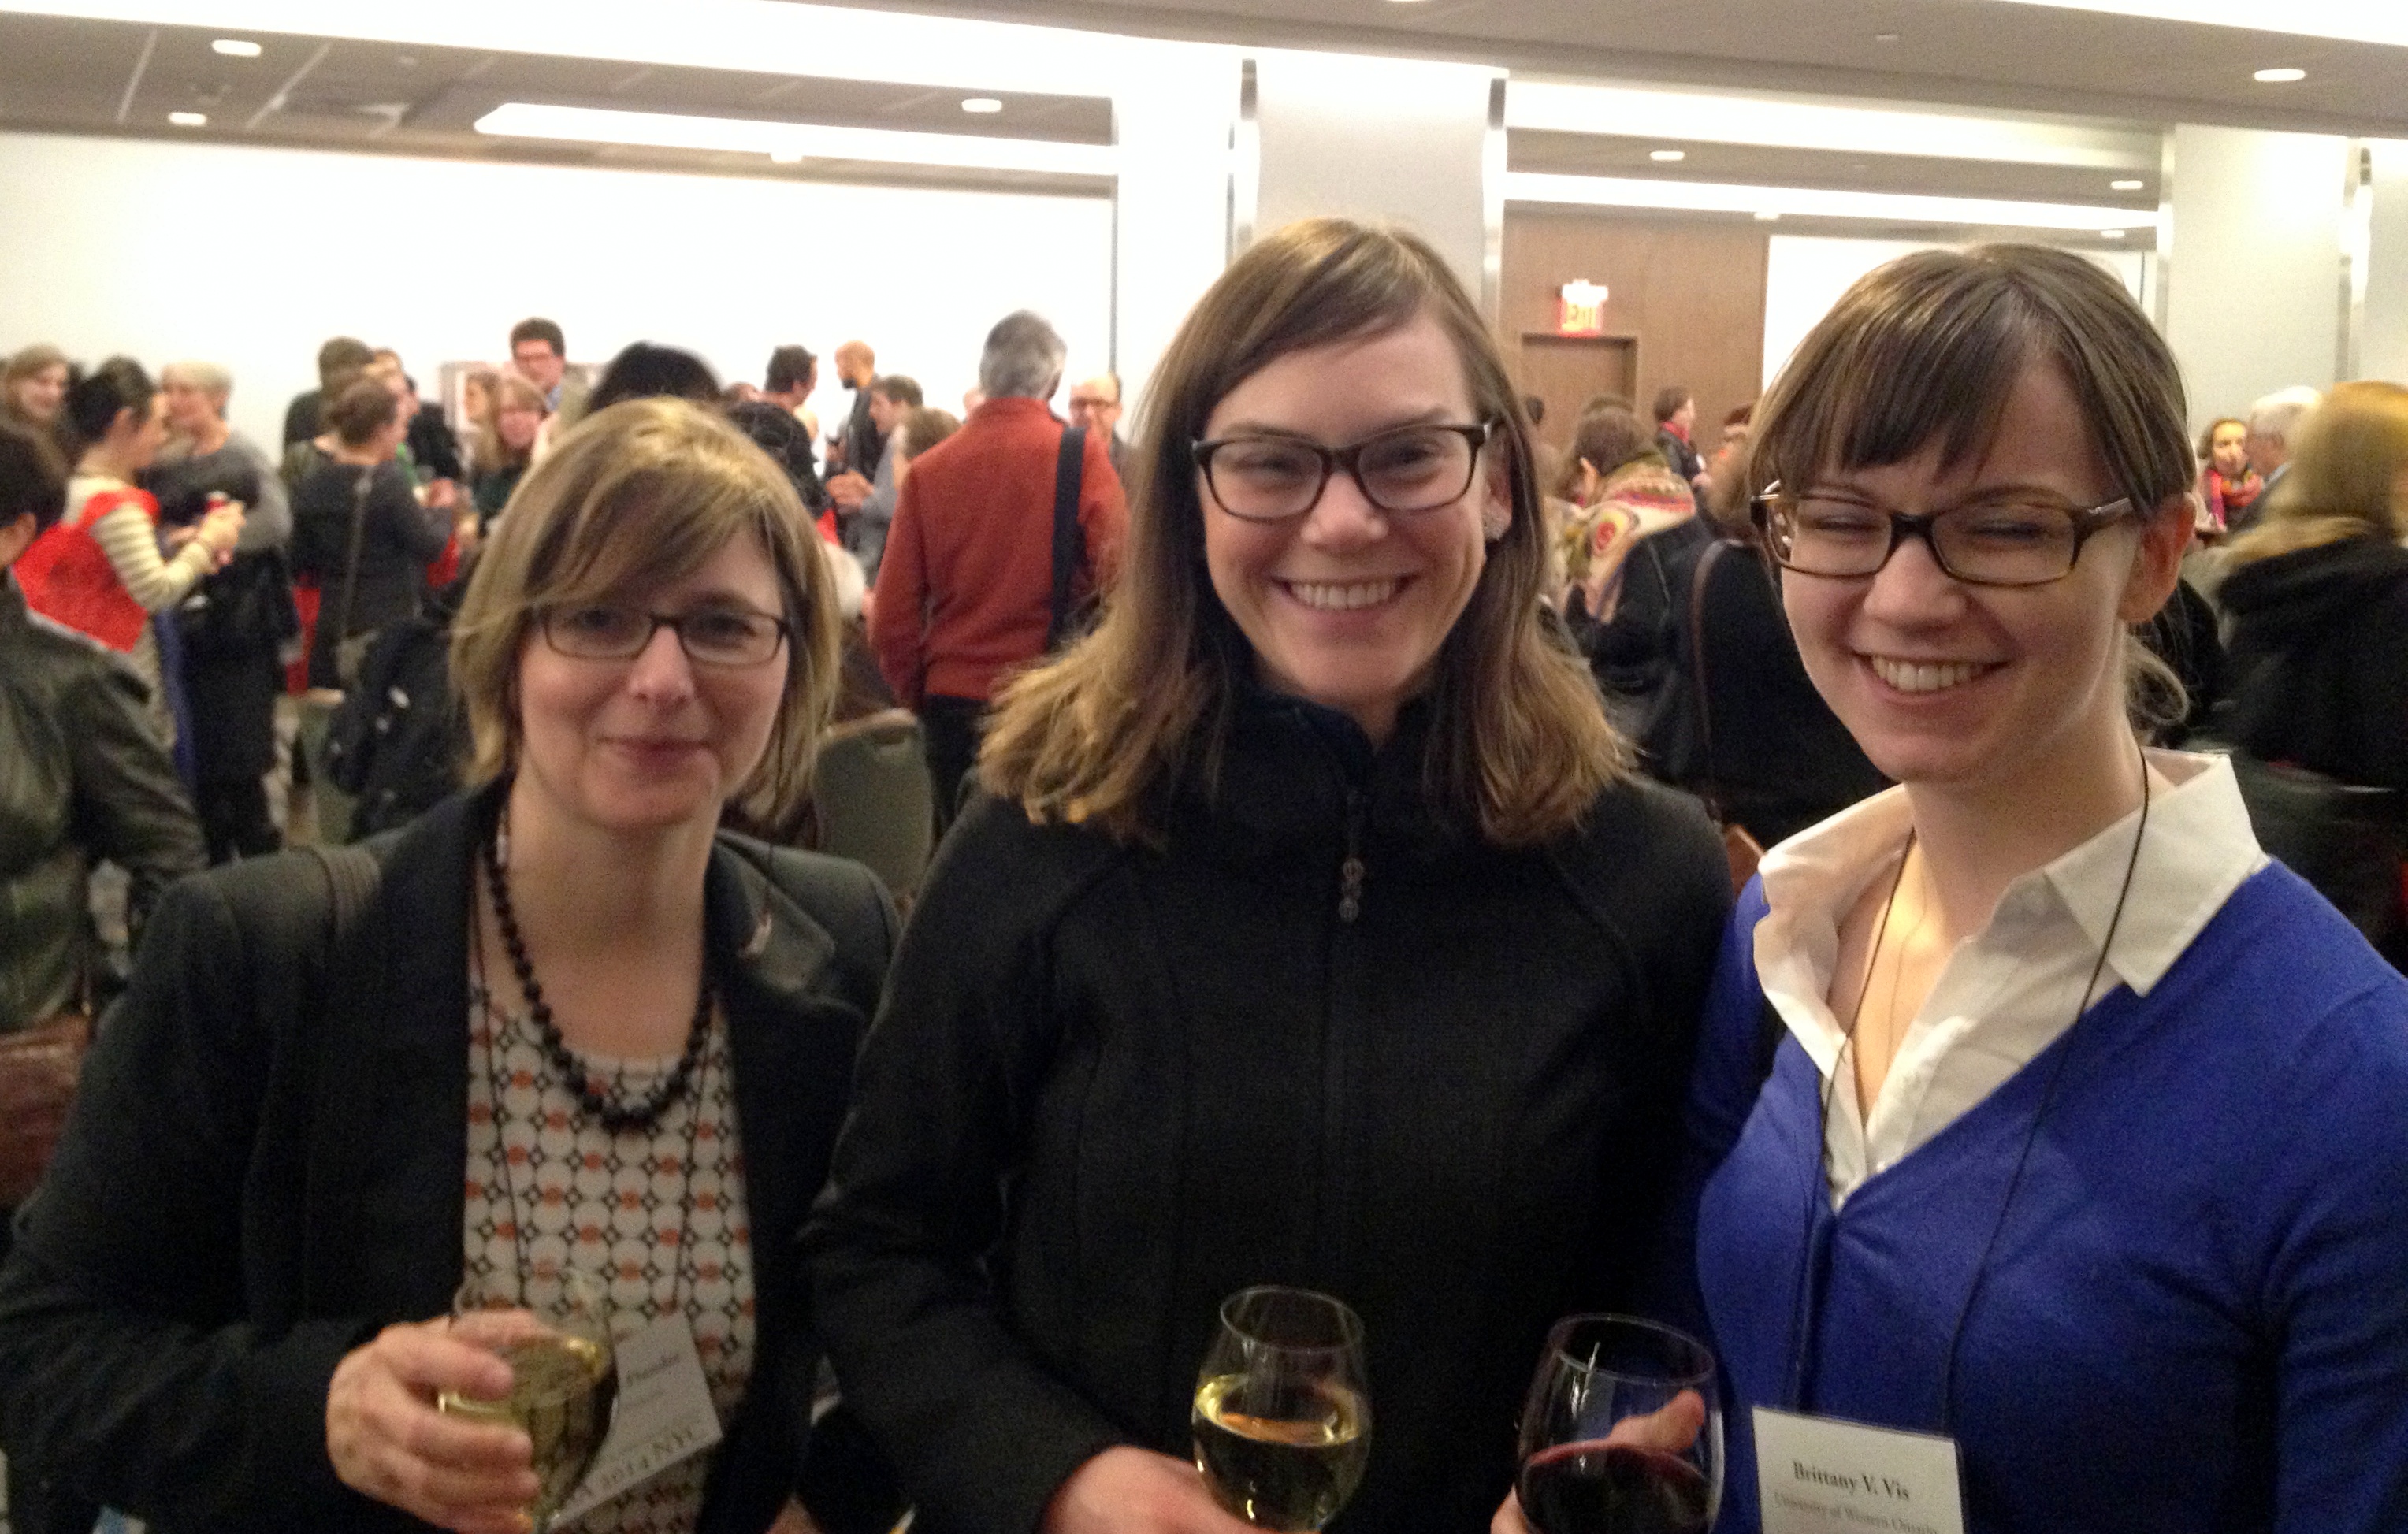 Kim @ the RSA Opening Reception with some
                        of the UVic contingent